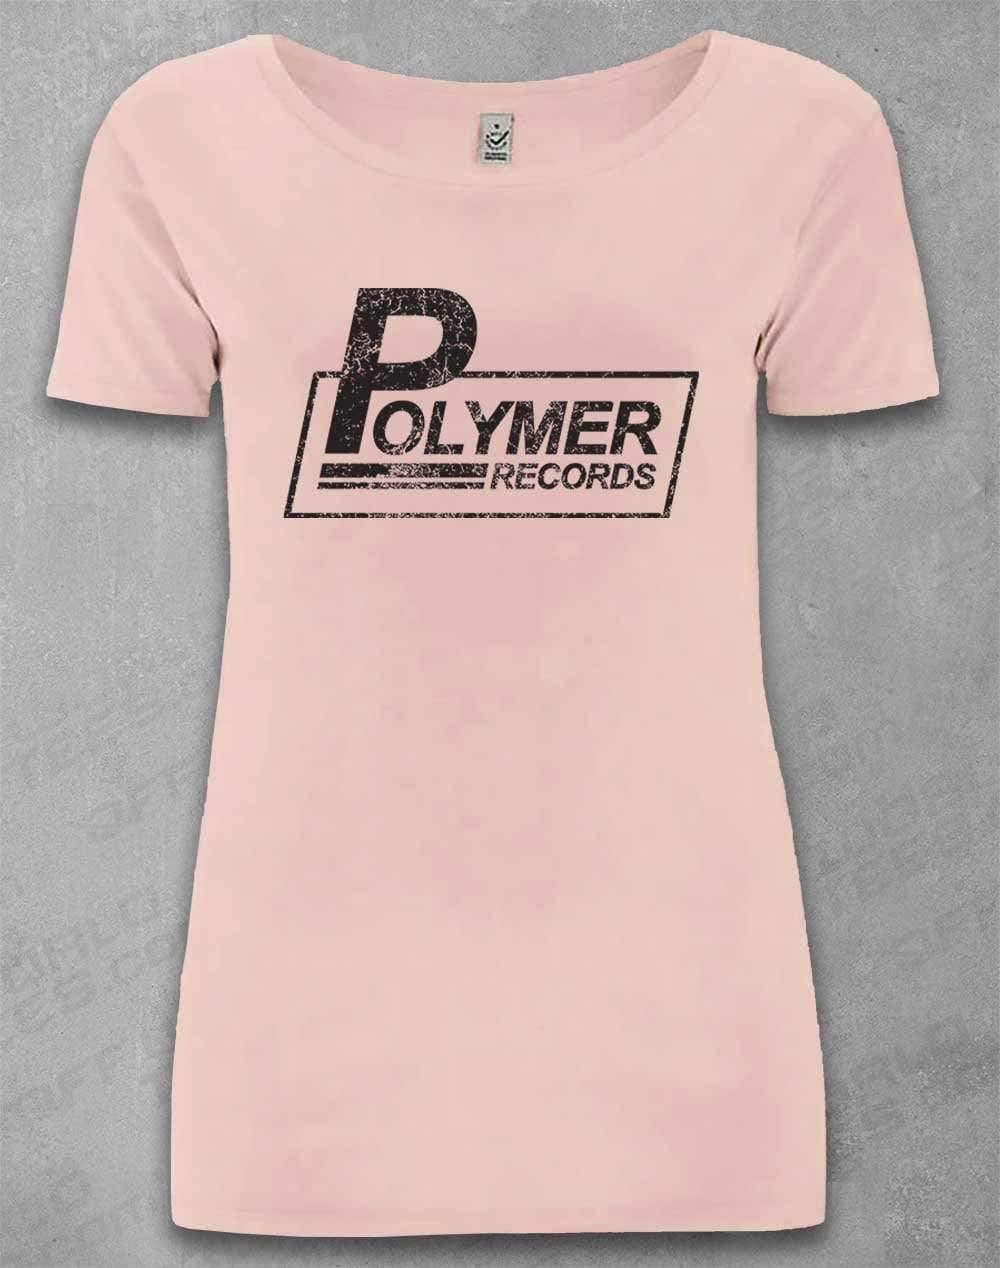 DELUXE Polymer Records Distressed Logo Organic Scoop Neck T-Shirt 8-10 / Light Pink  - Off World Tees